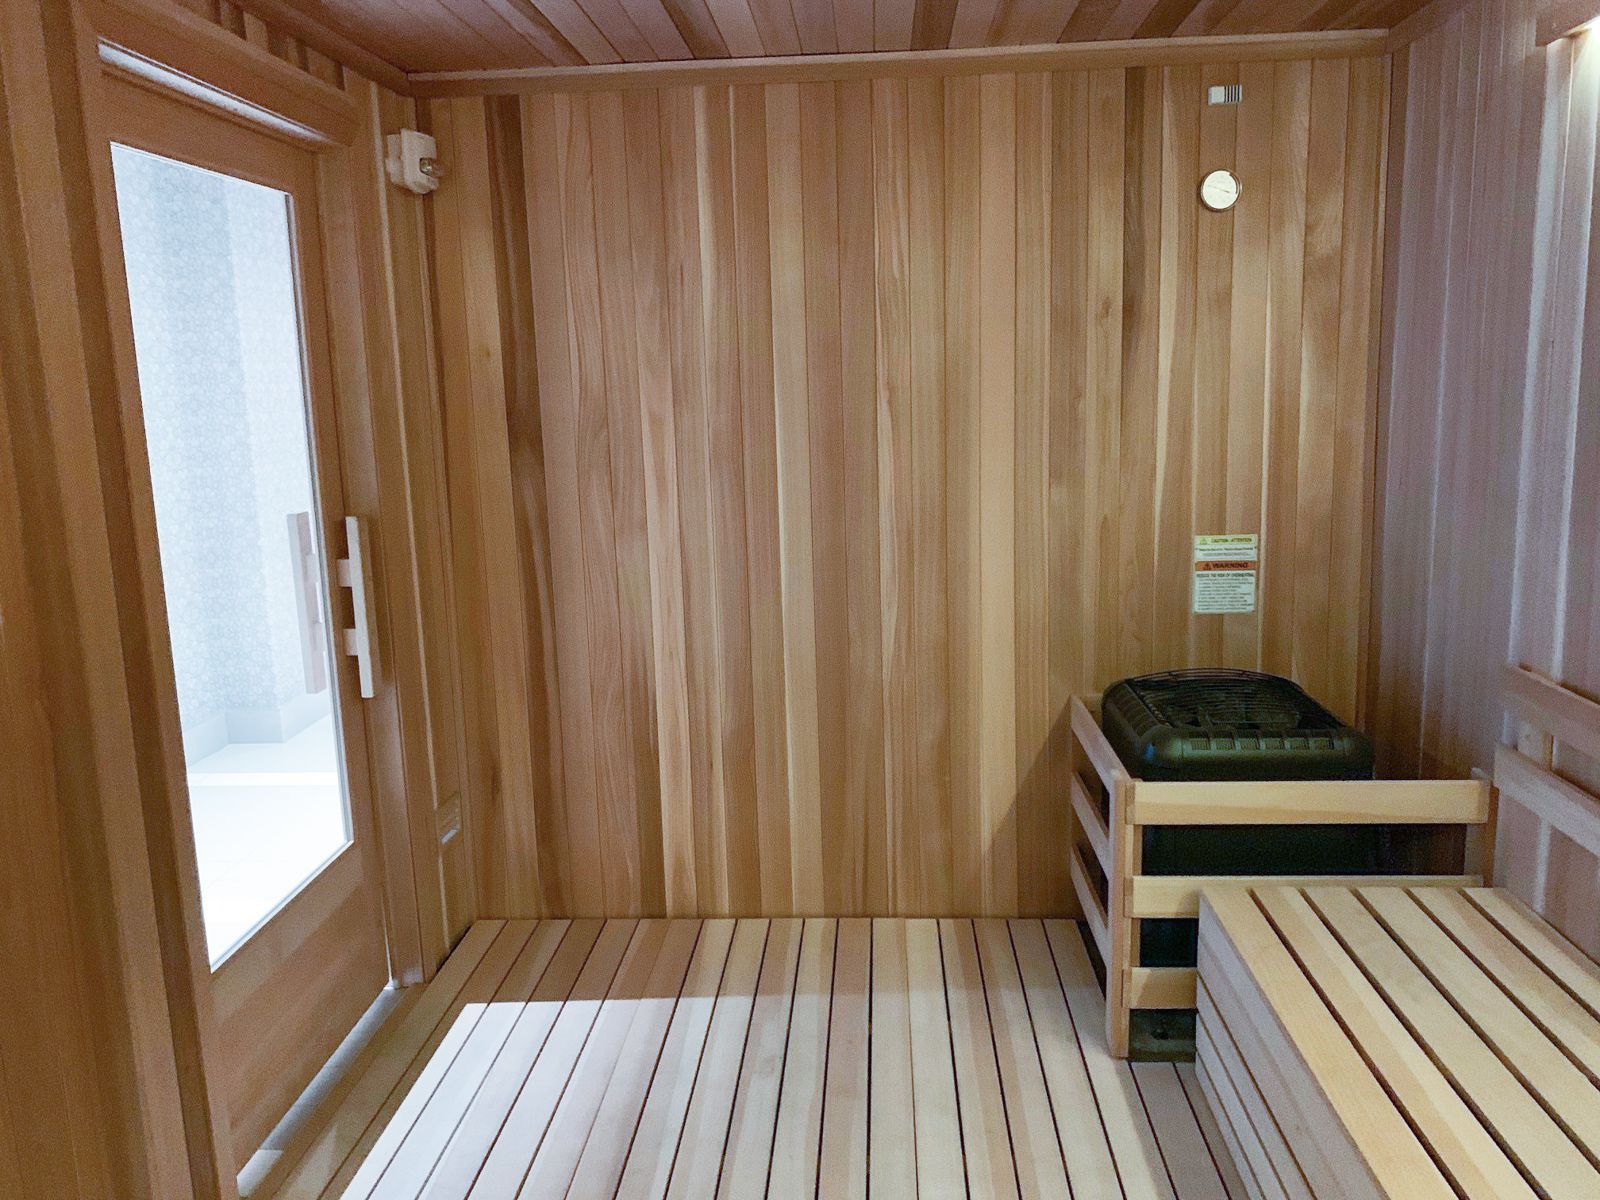 The Vue Charlotte sauna room in spa with wood paneling